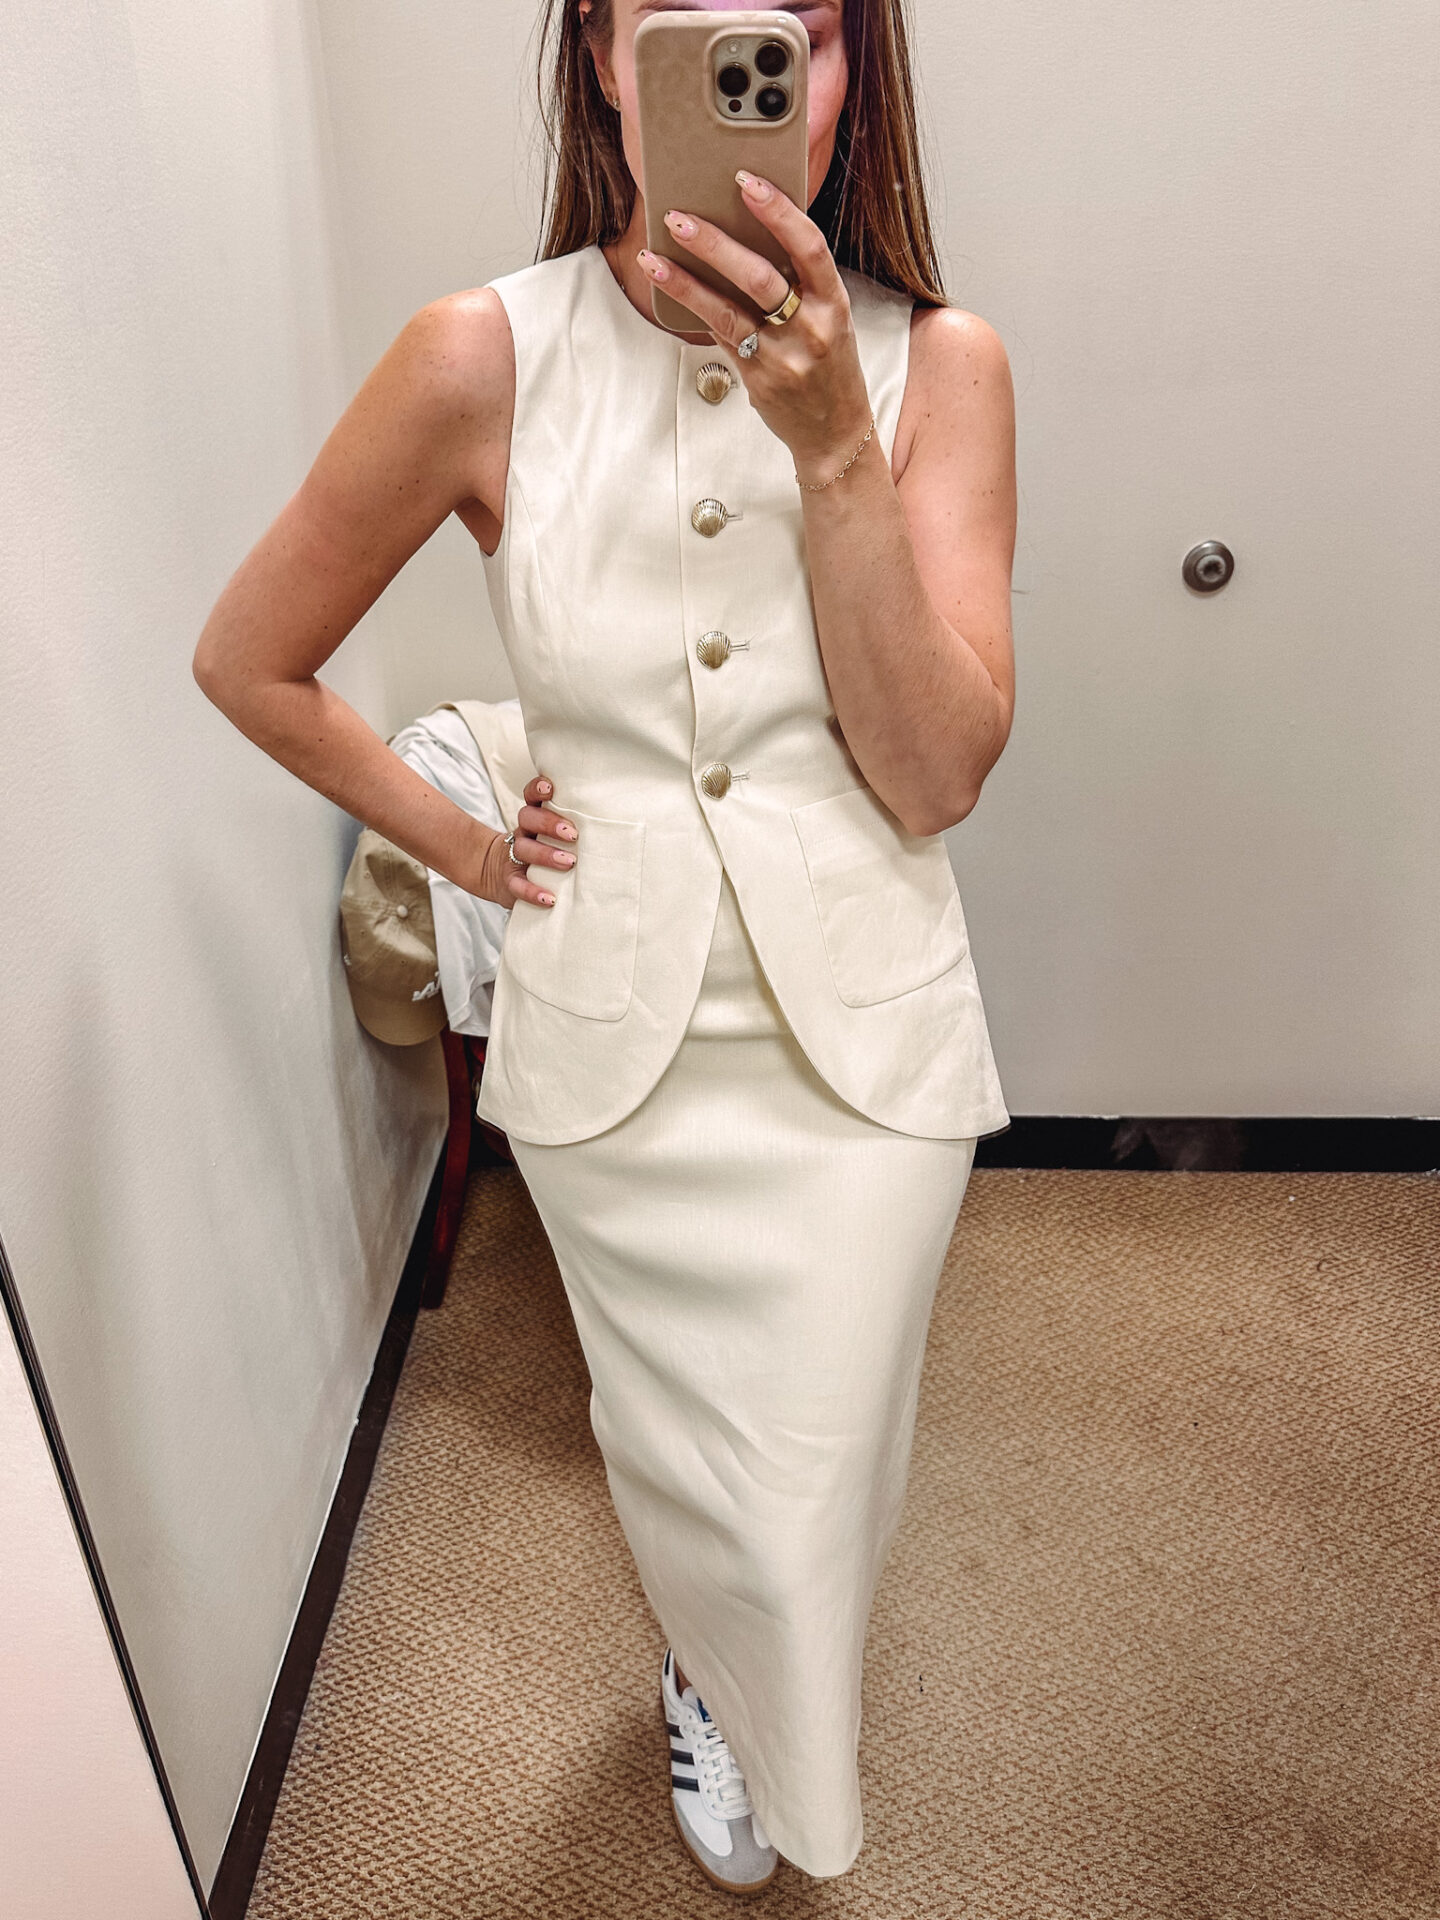 My Favorite Pieces From Dillard's Exclusive Brand: Antonio Melani X M.G. Style. Fashion blogger Angela Lanter wearing the x M.G. Style Nautical x M.G. Style Sophia Linen Blend Gold Shell Patch Pocket Coordinating Vest and Riviera Coordinating Linen Blend Skirt